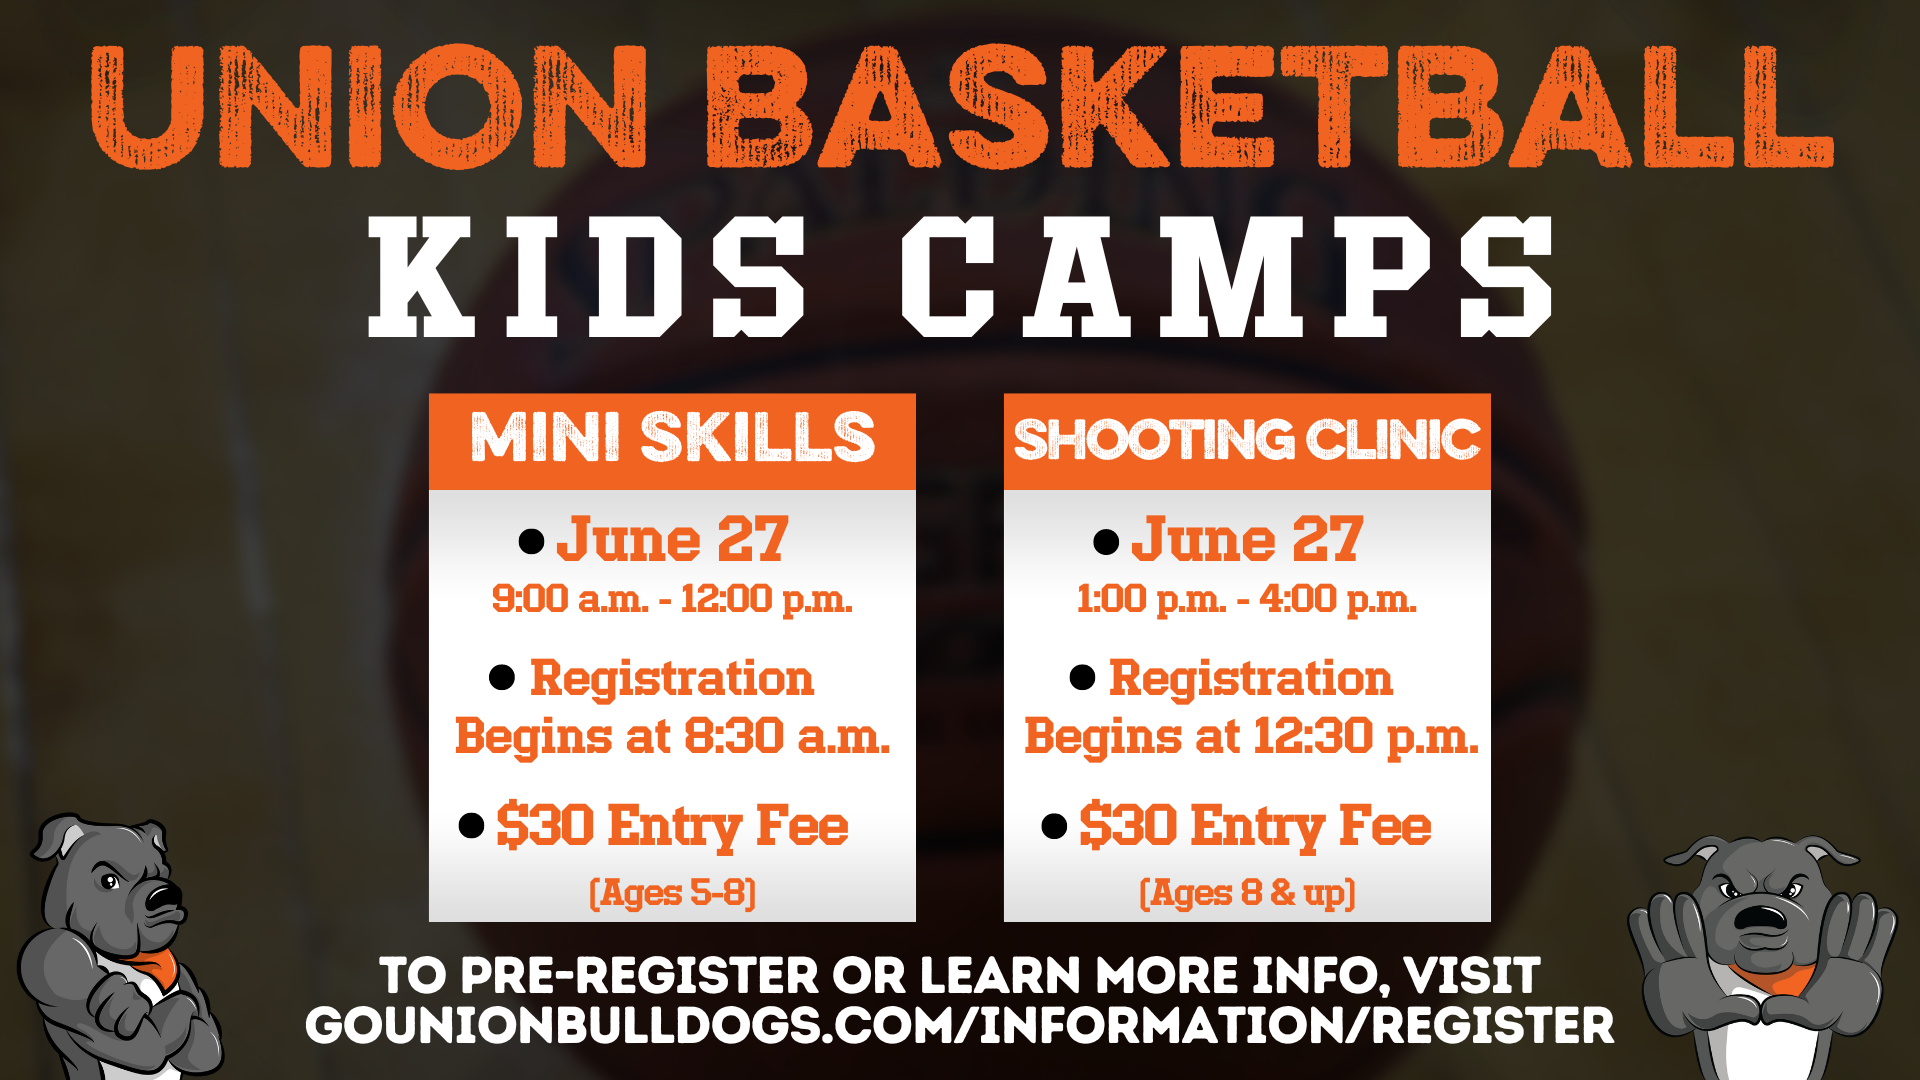 Schedule change made to summer basketball camps